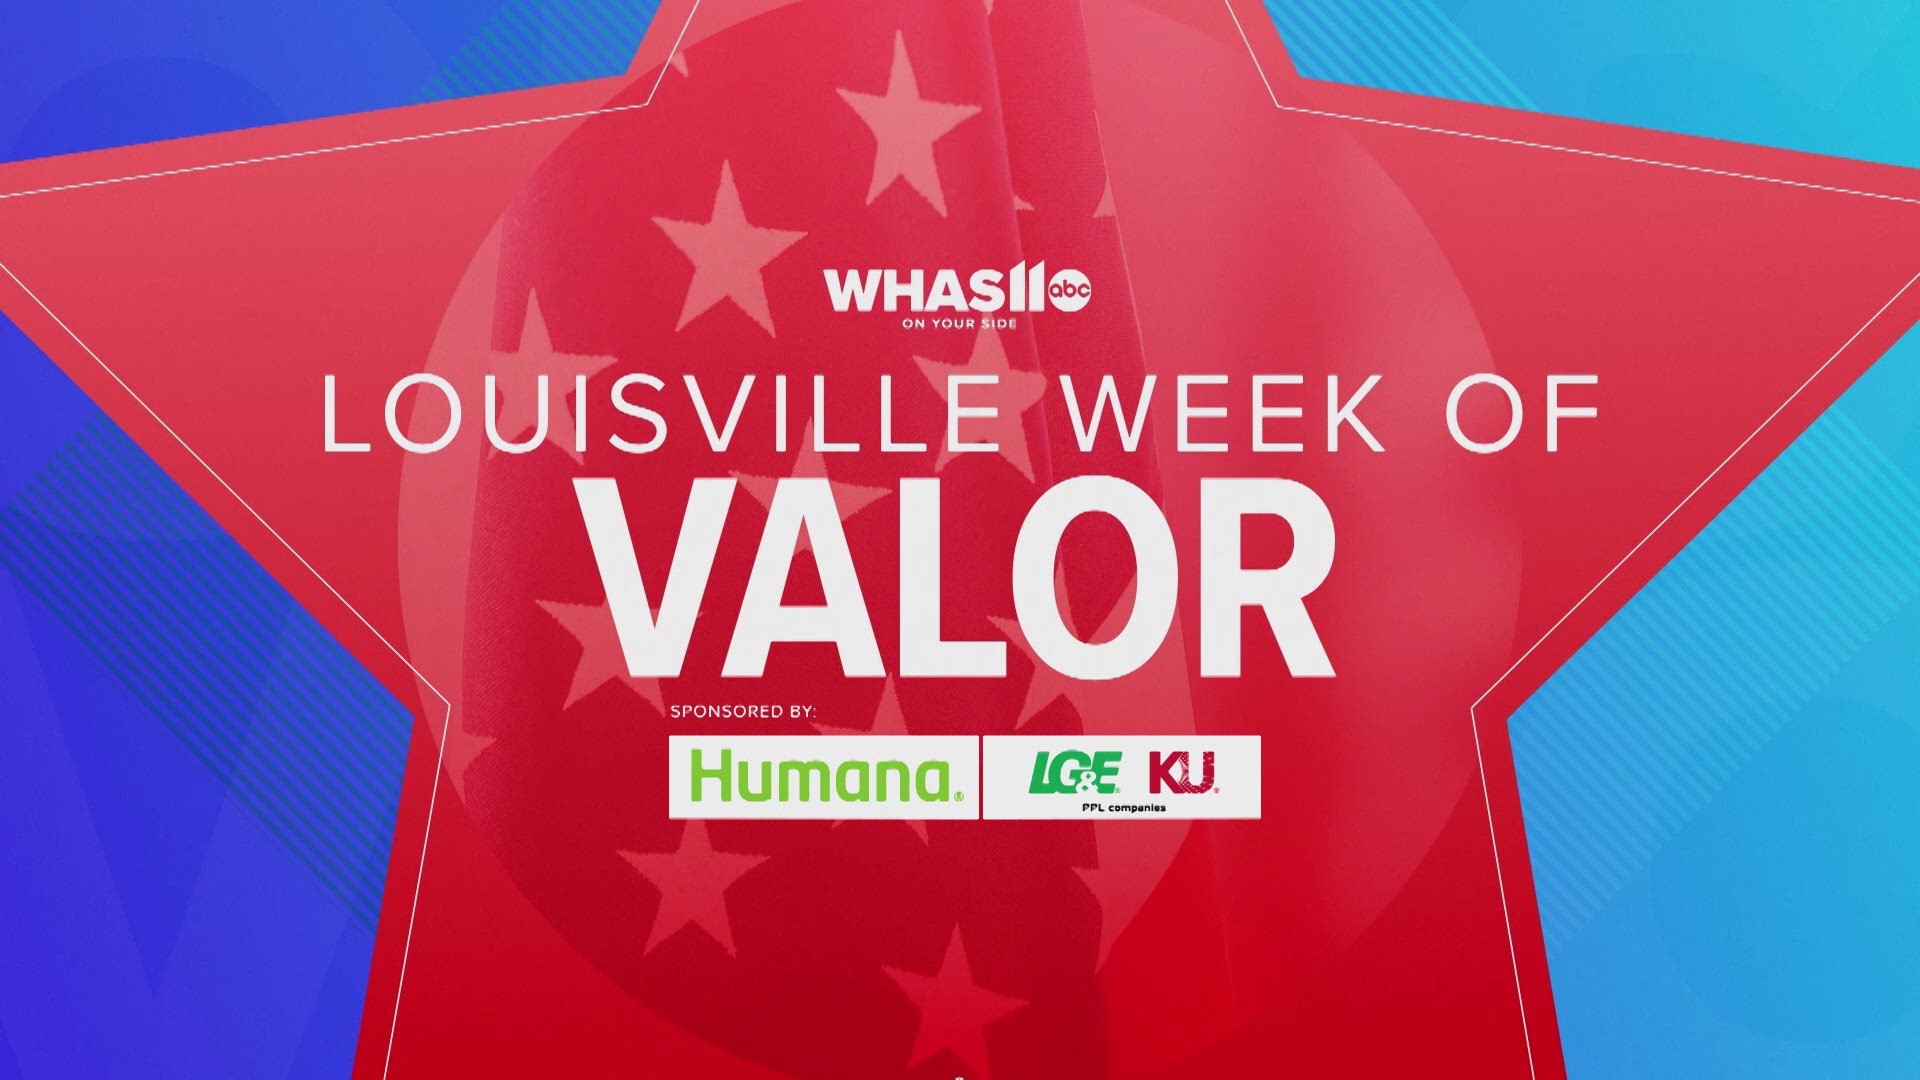 Louisville Week of Valor is November 11th, 2020 on Great Day Live starting at 9am.